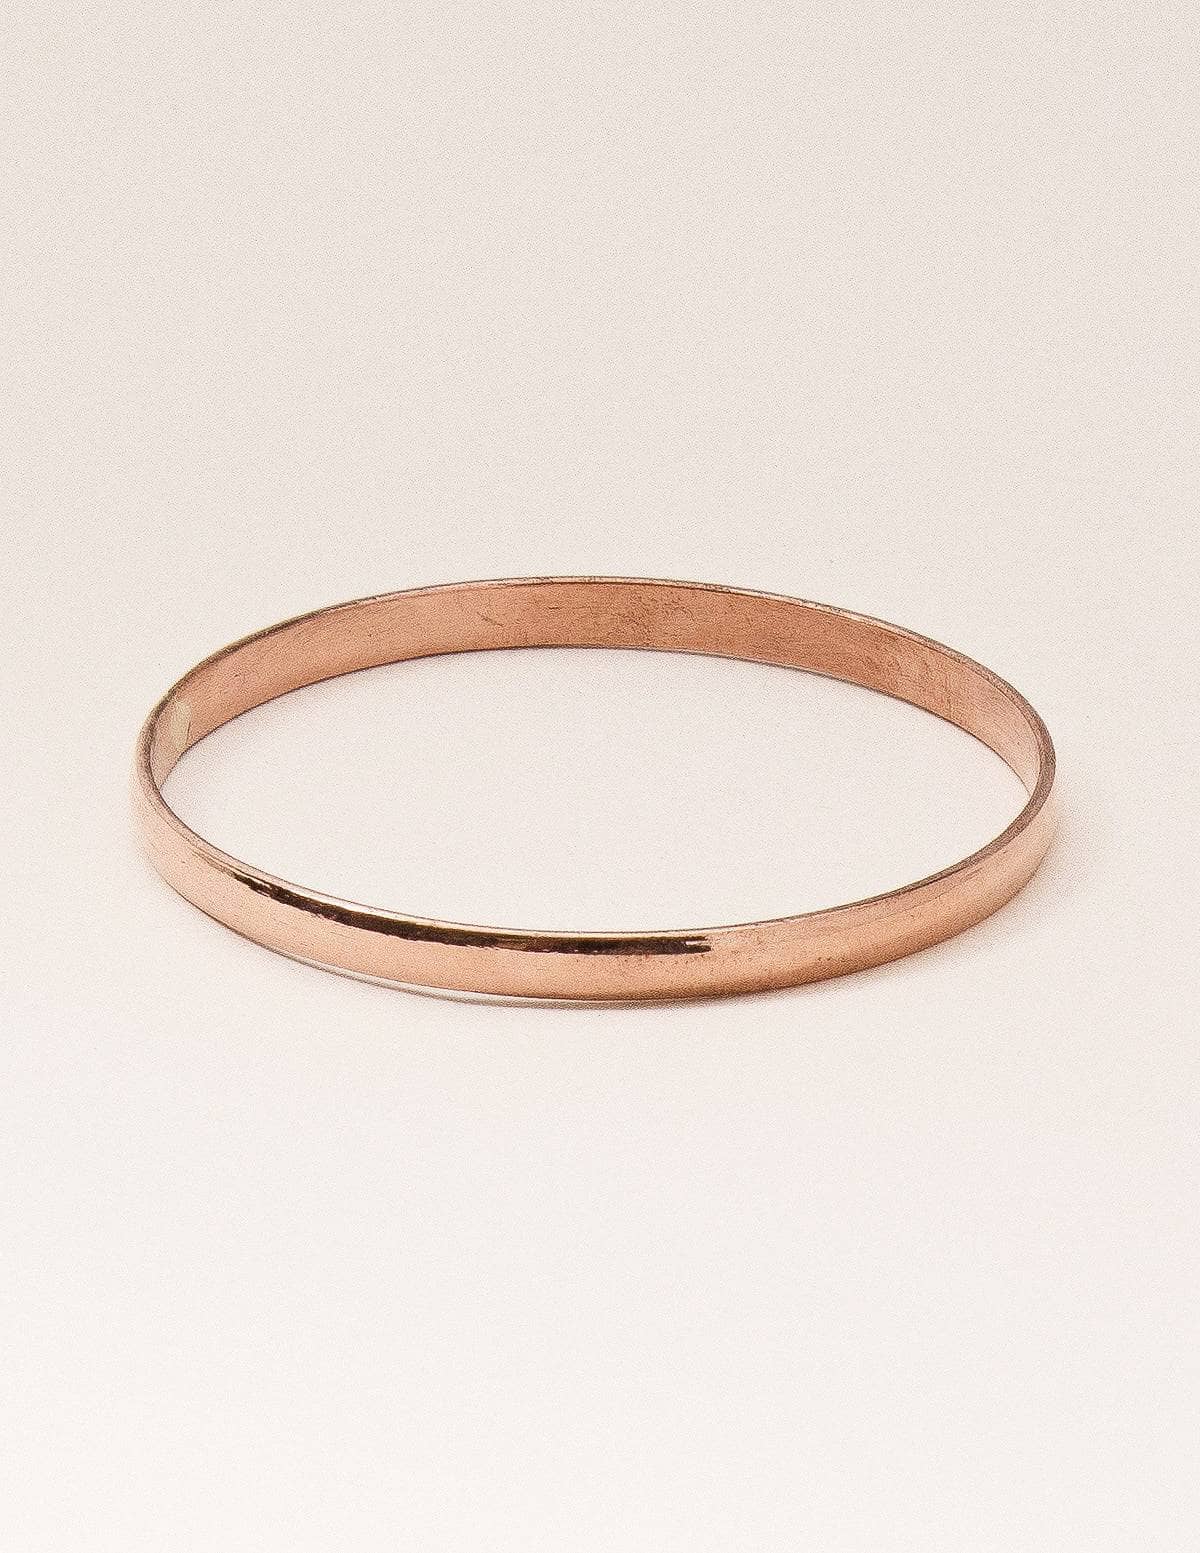 Buy 100% Pure Copper Snake Ring Online at Low Price in India -  Abhimantrit.com